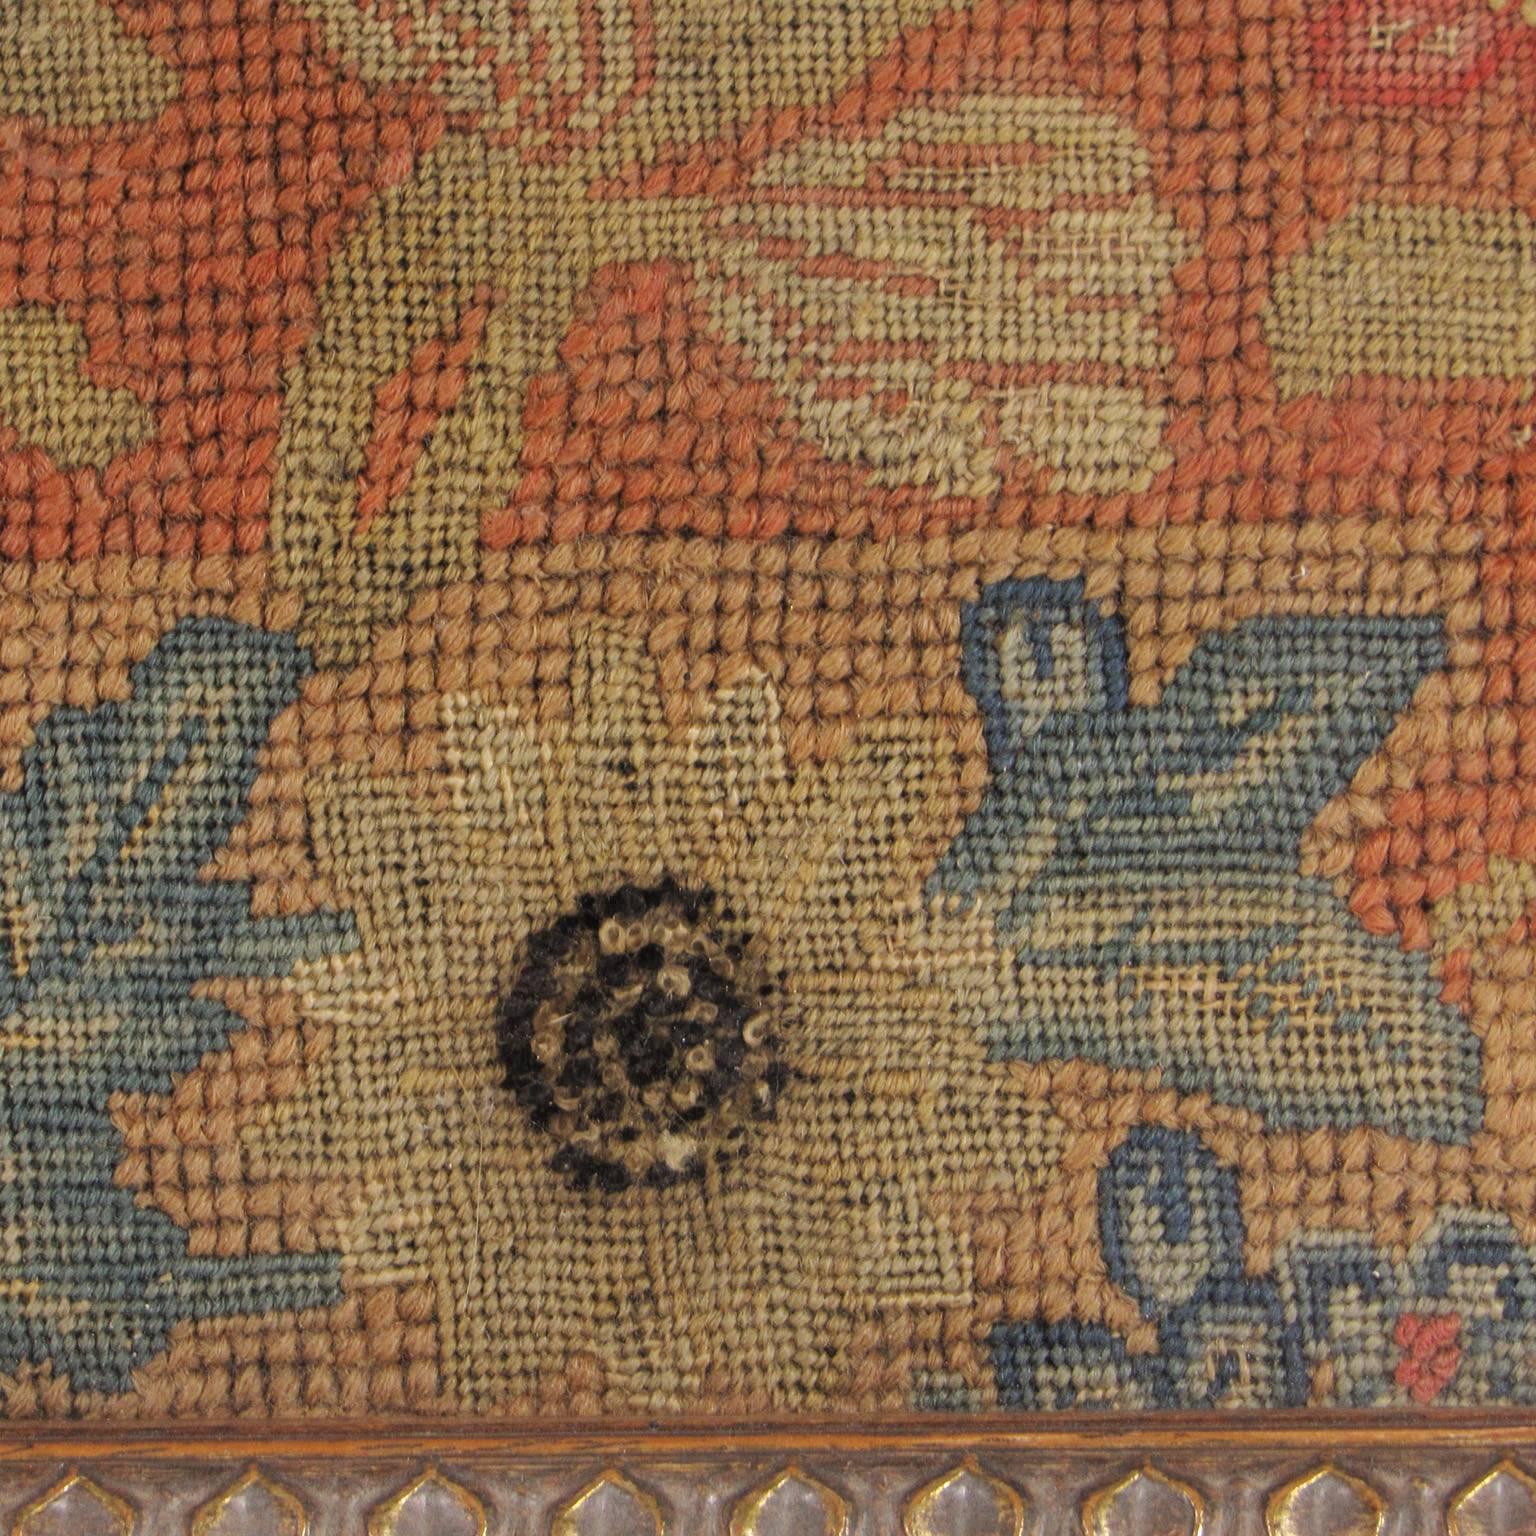 english needlework was well known outside england by the name